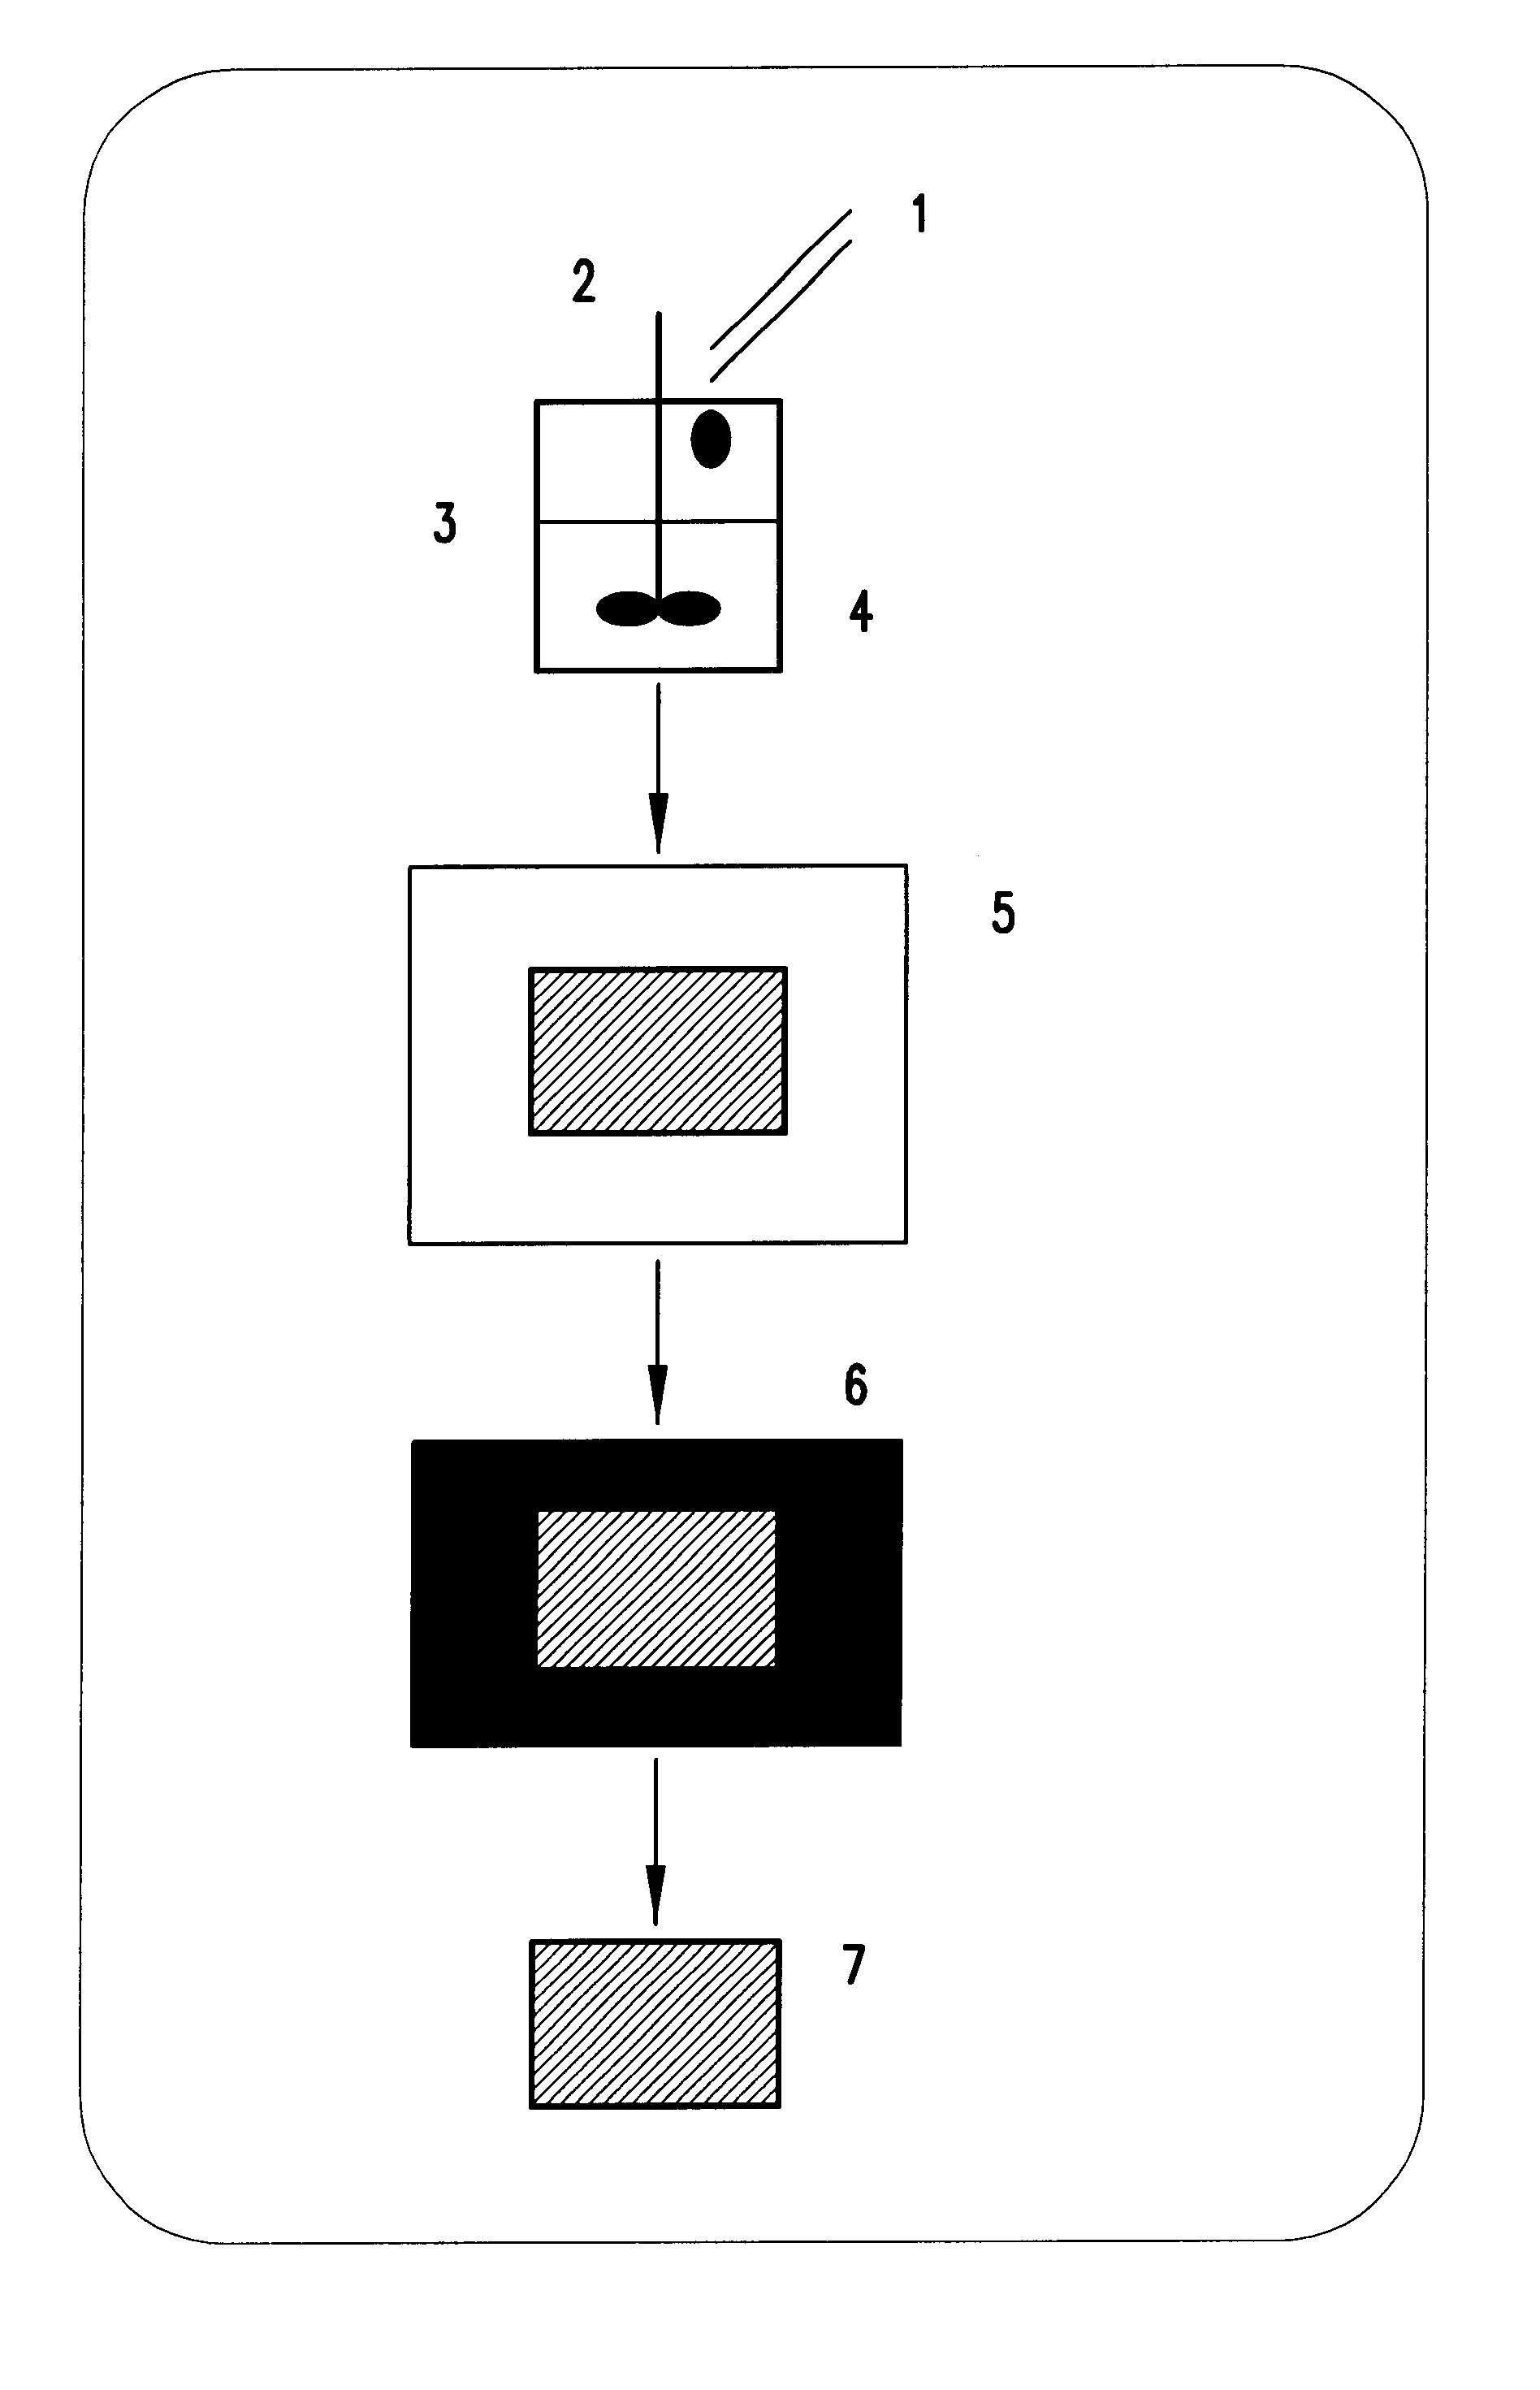 Method of forming polysaccharide sponges for cell culture and transplantation